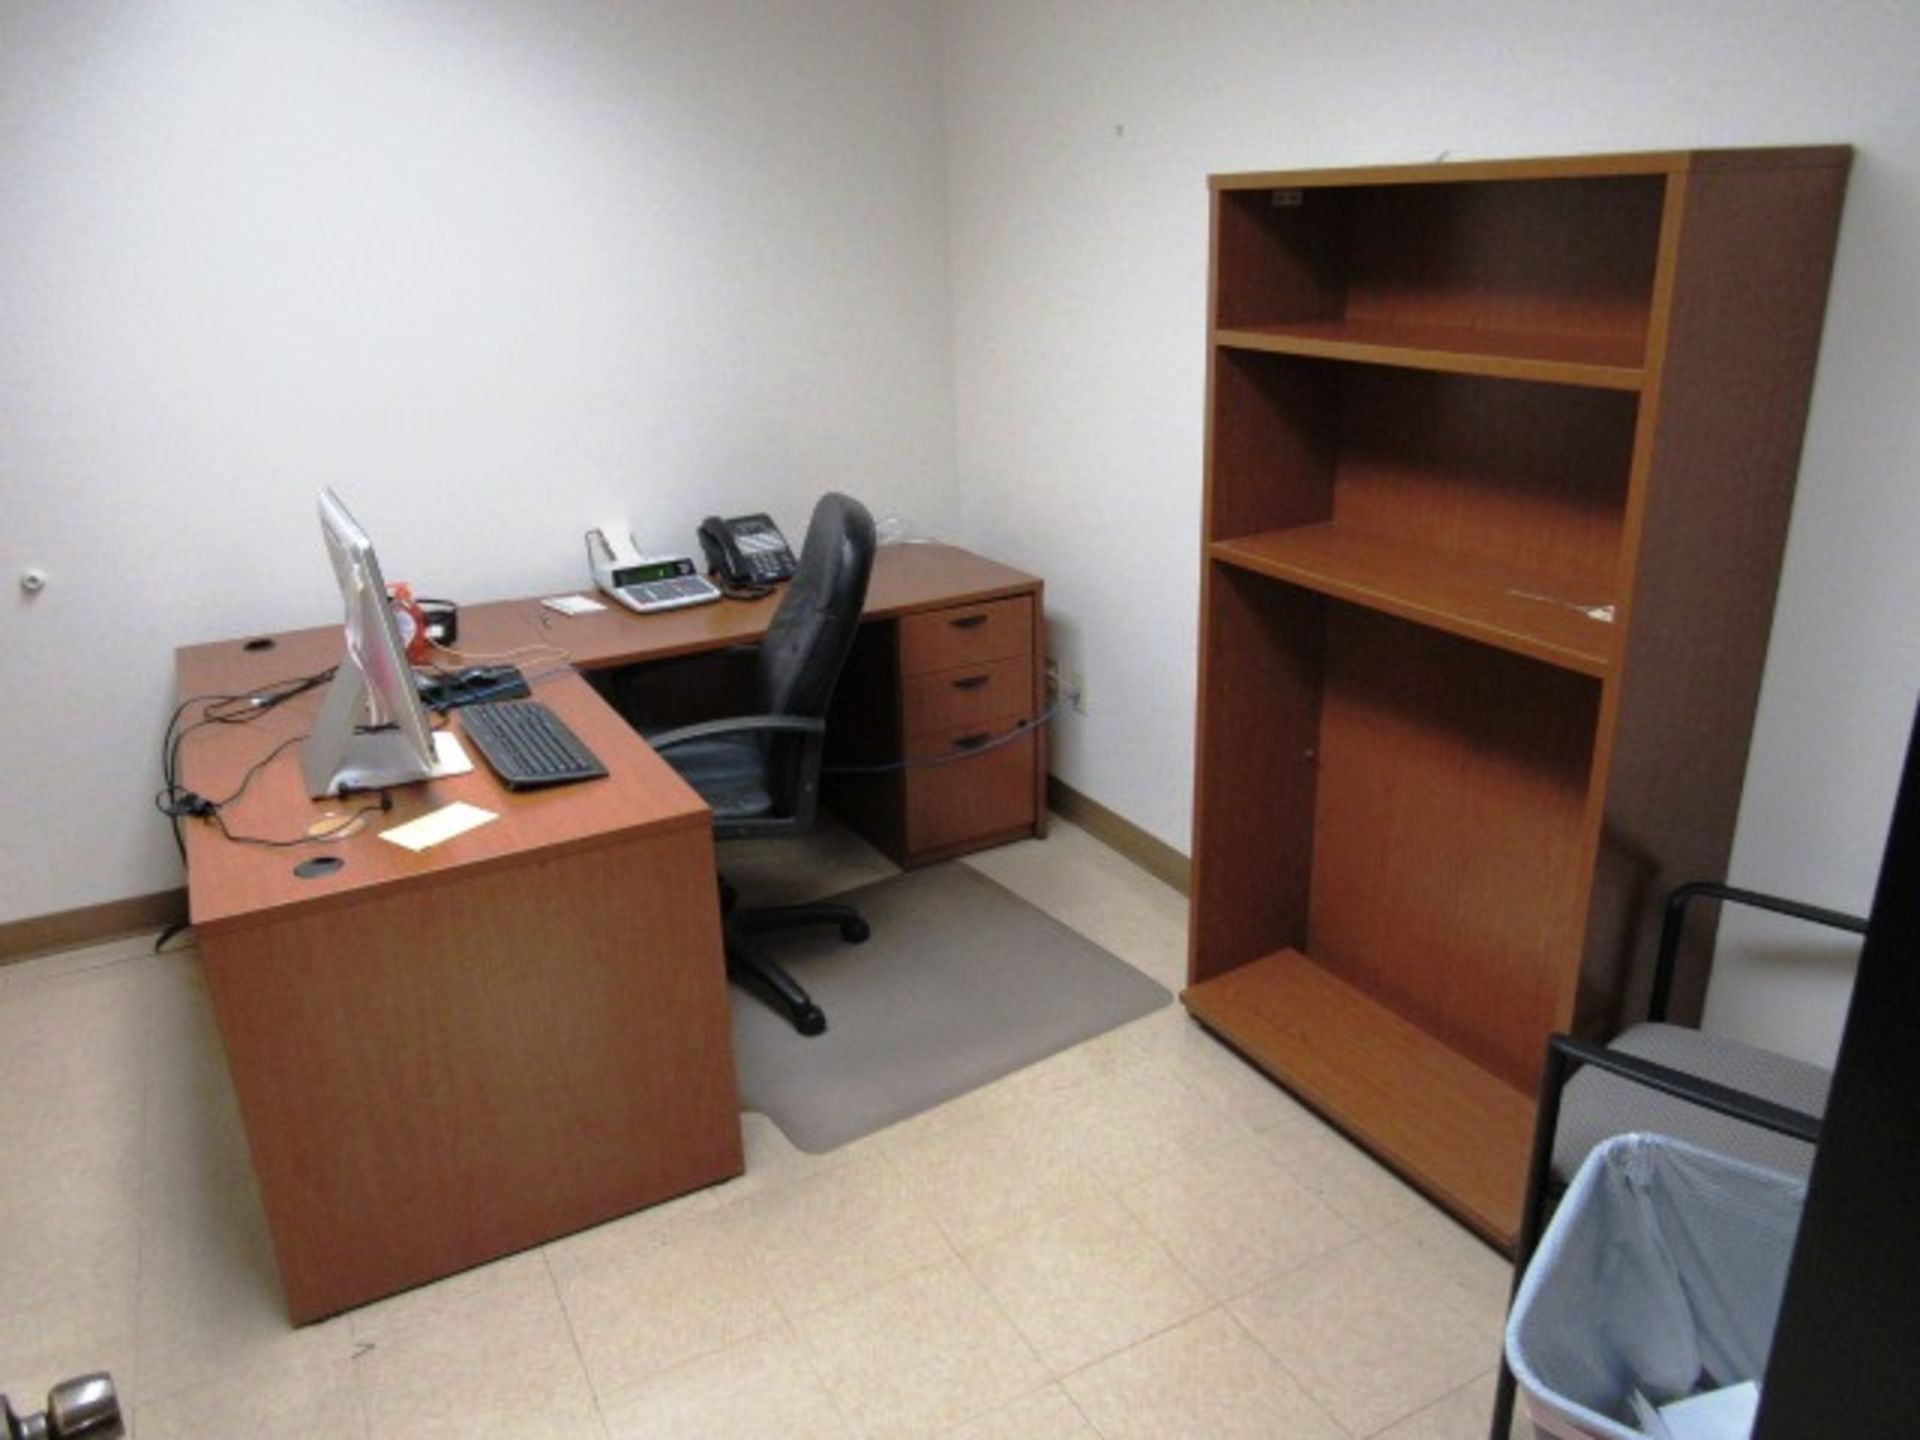 Contents of Office